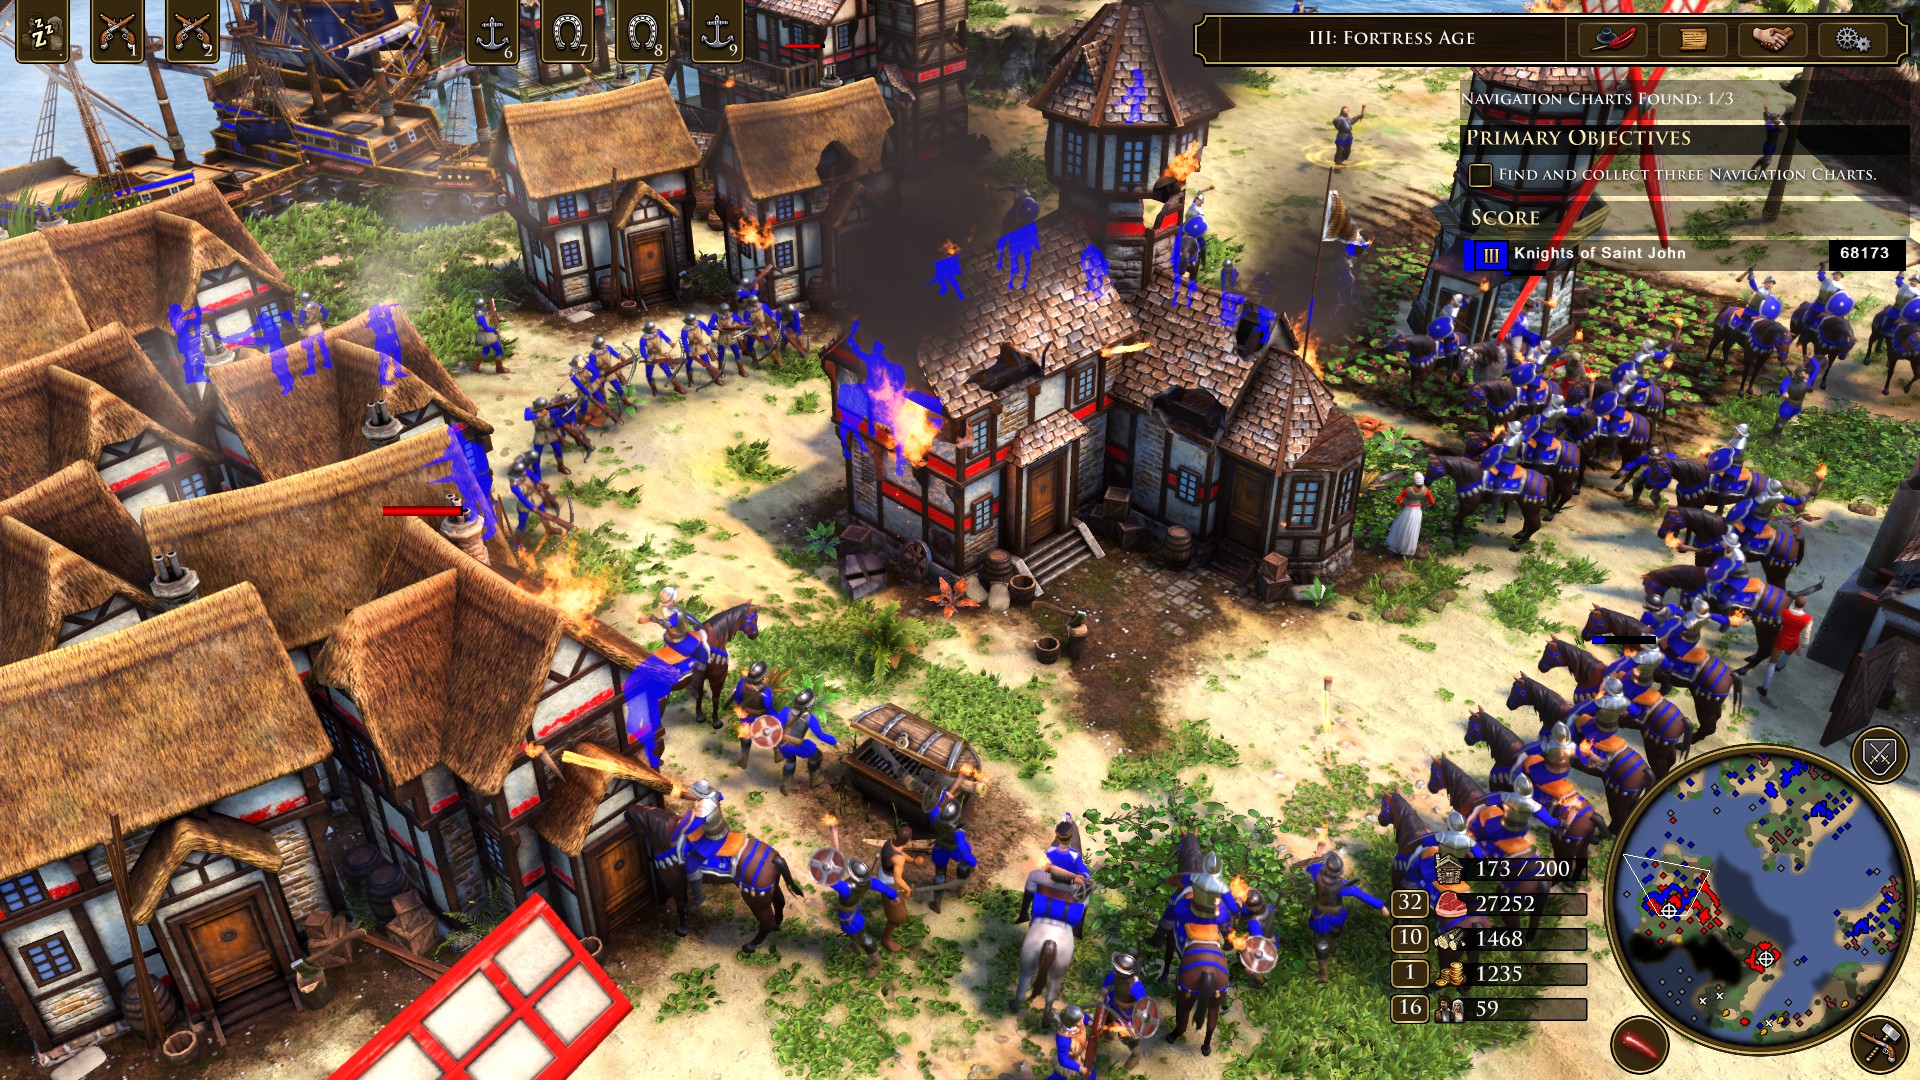 Age of Empires III: Definitive Edition Goes Free to Play : r/aoe3